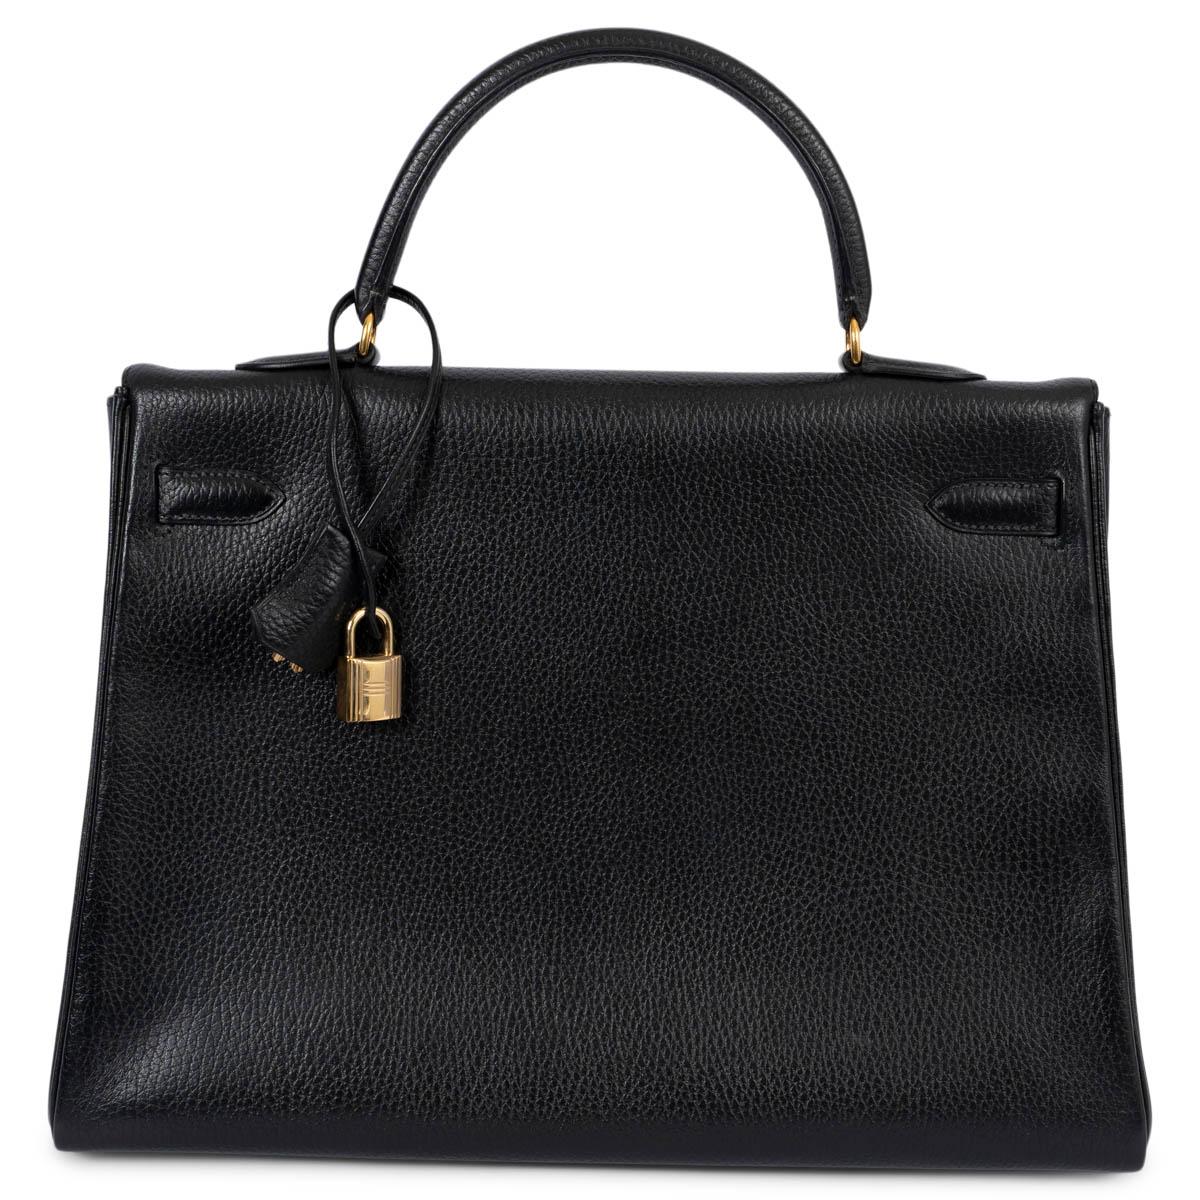 HERMES black Grainee leather KELLY 35 RETOURNE Bag GHW In Excellent Condition For Sale In Zürich, CH